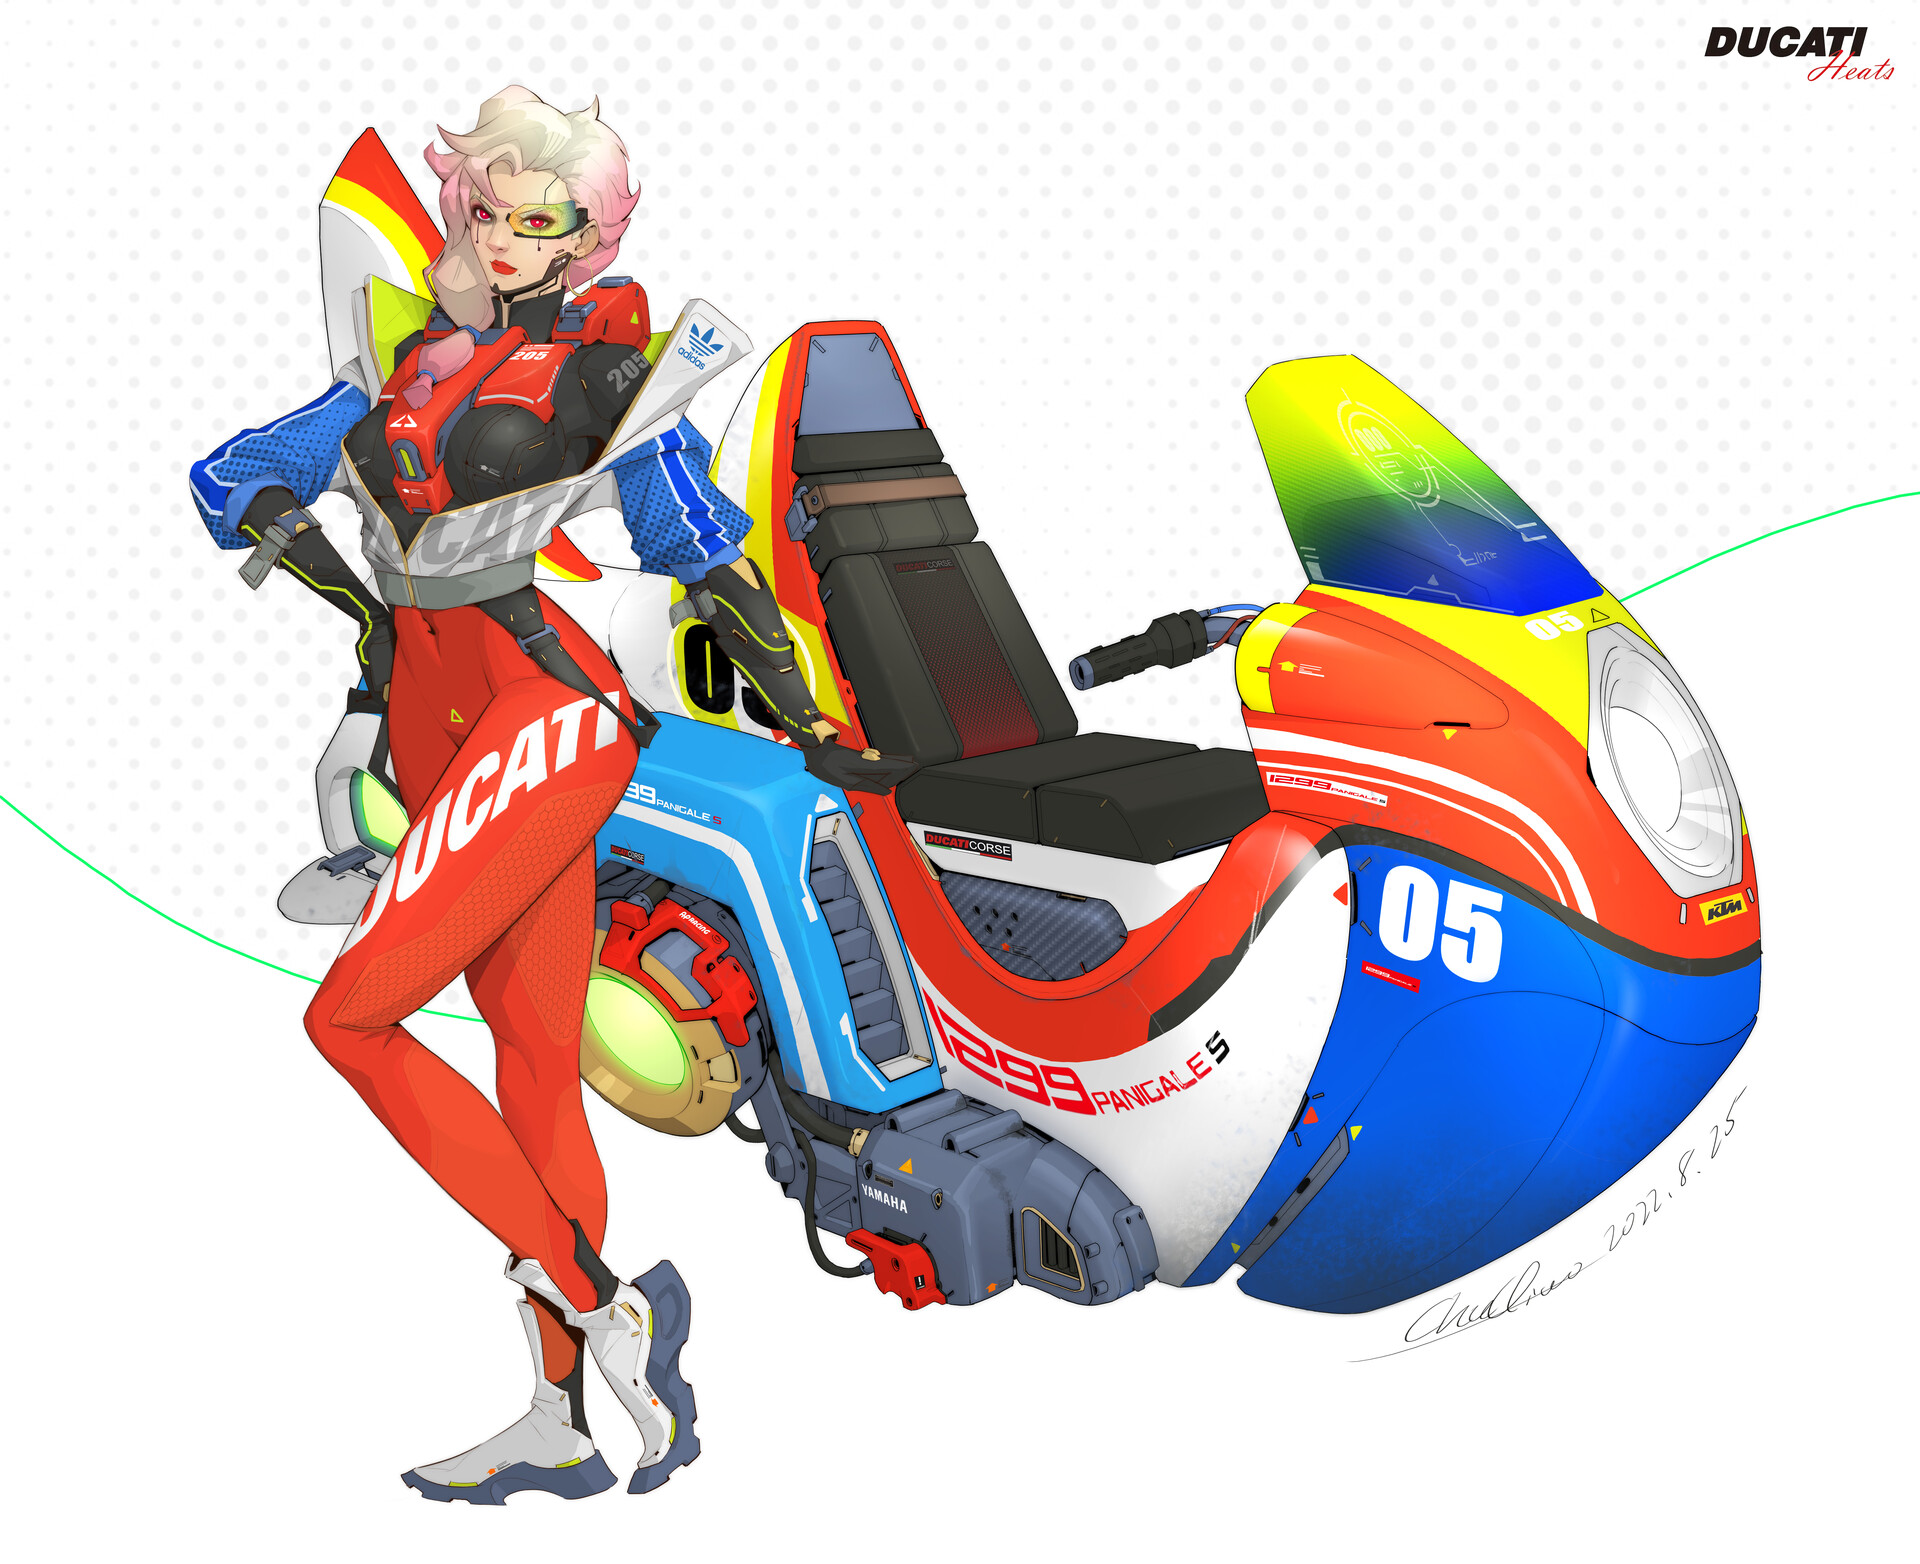 Motorcycle by Chu Qiao pic